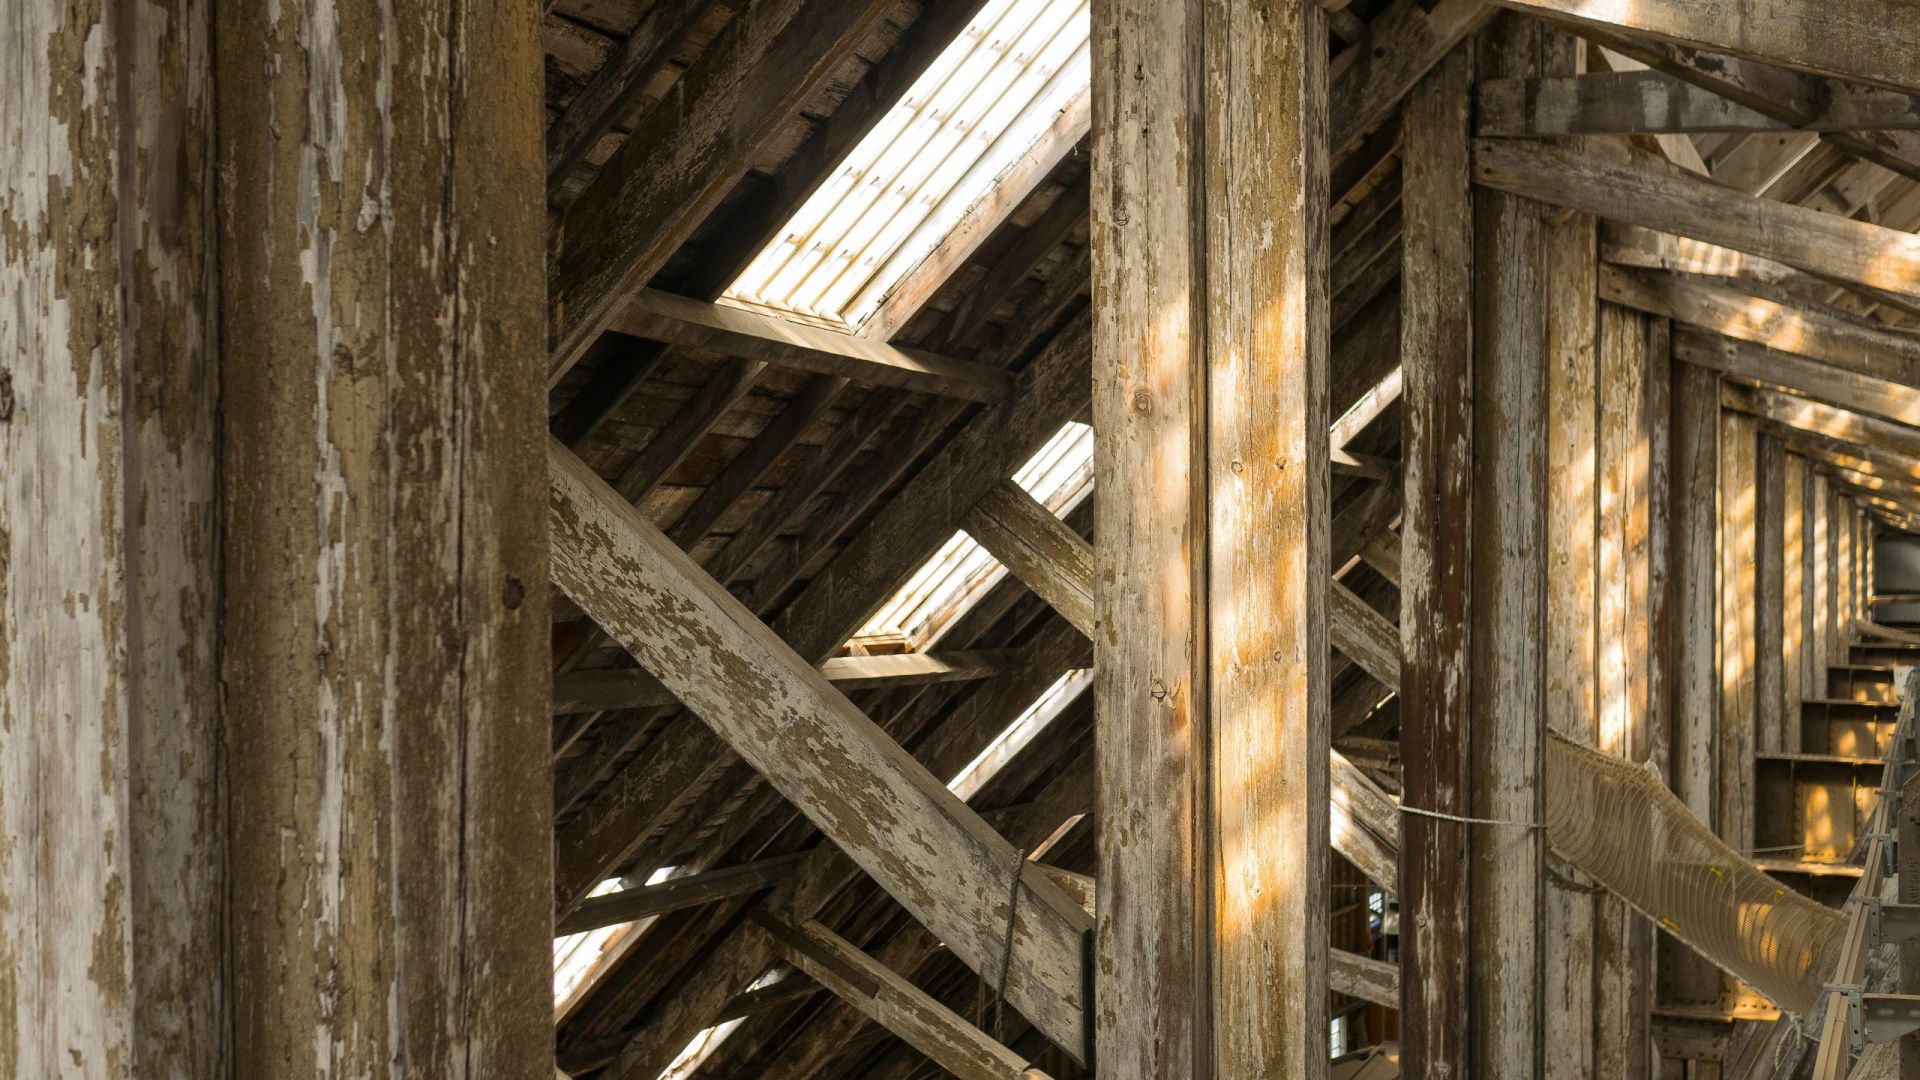 Timber Construction – The solution for a more sustainable building sector?